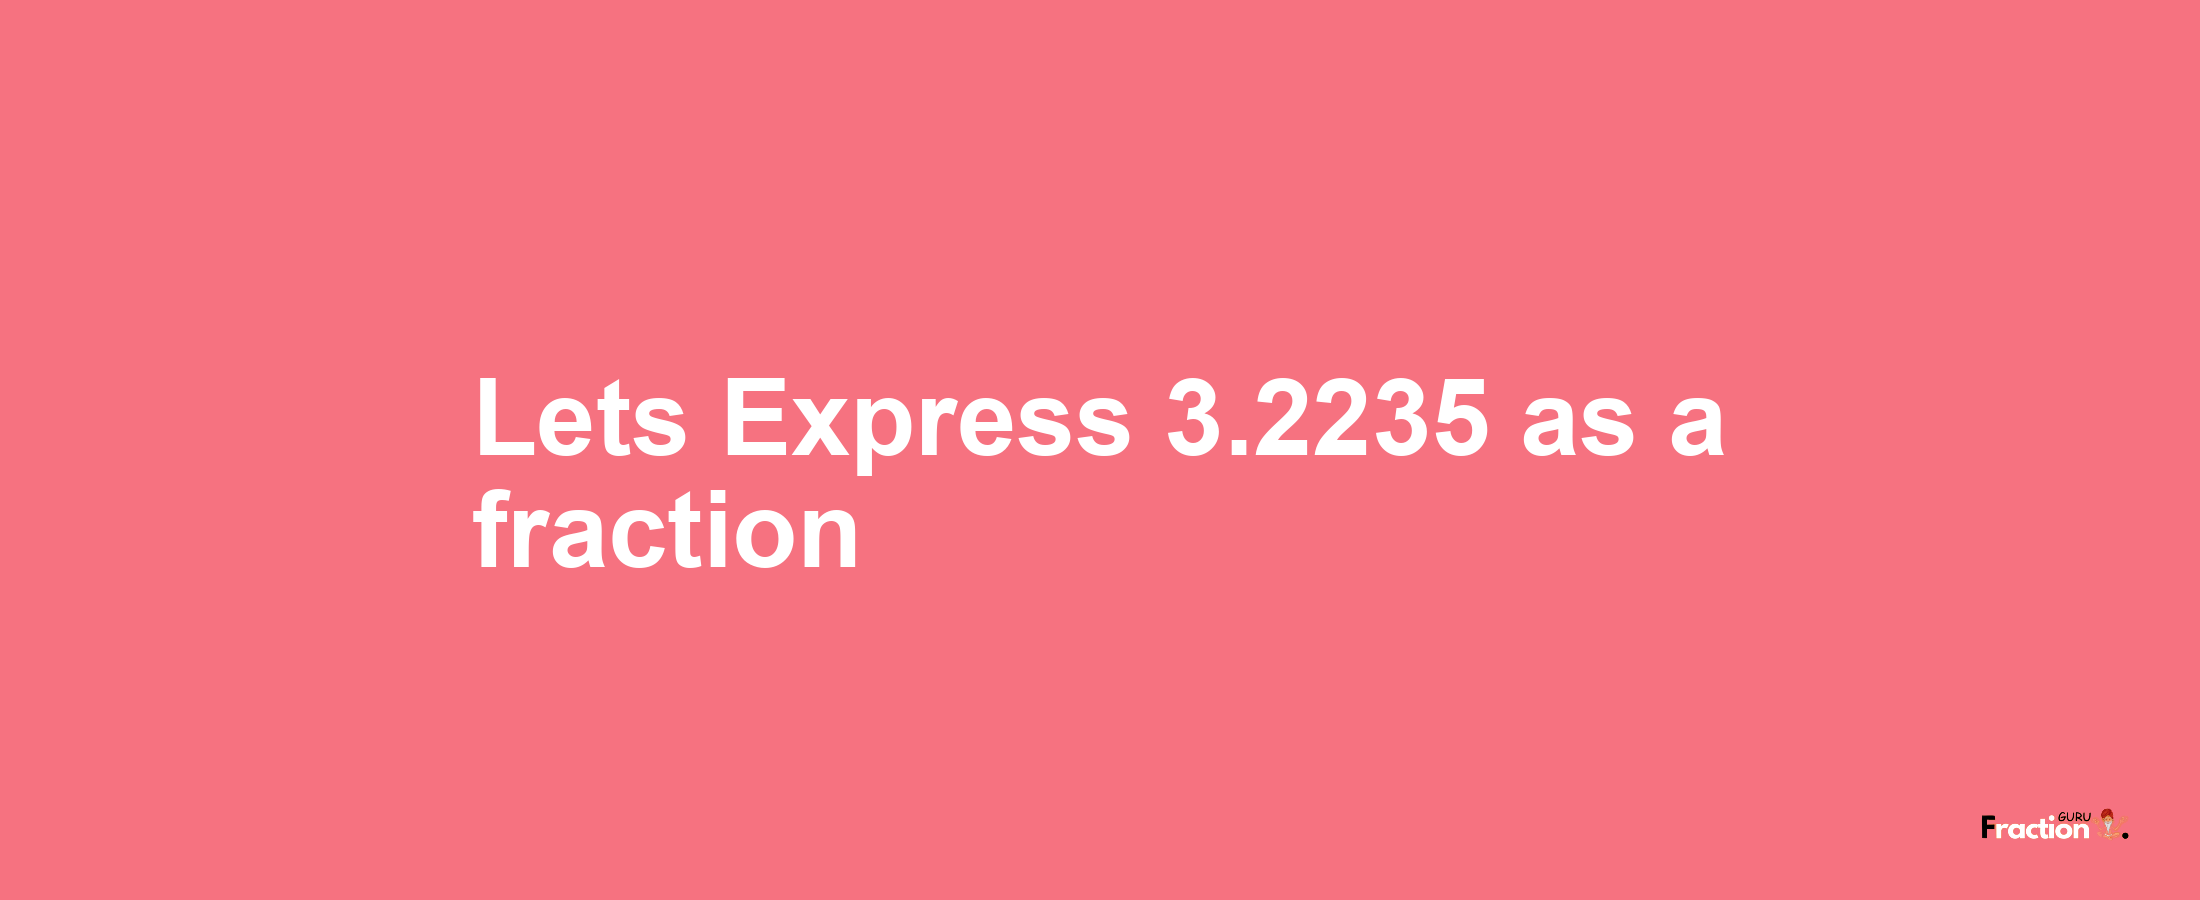 Lets Express 3.2235 as afraction